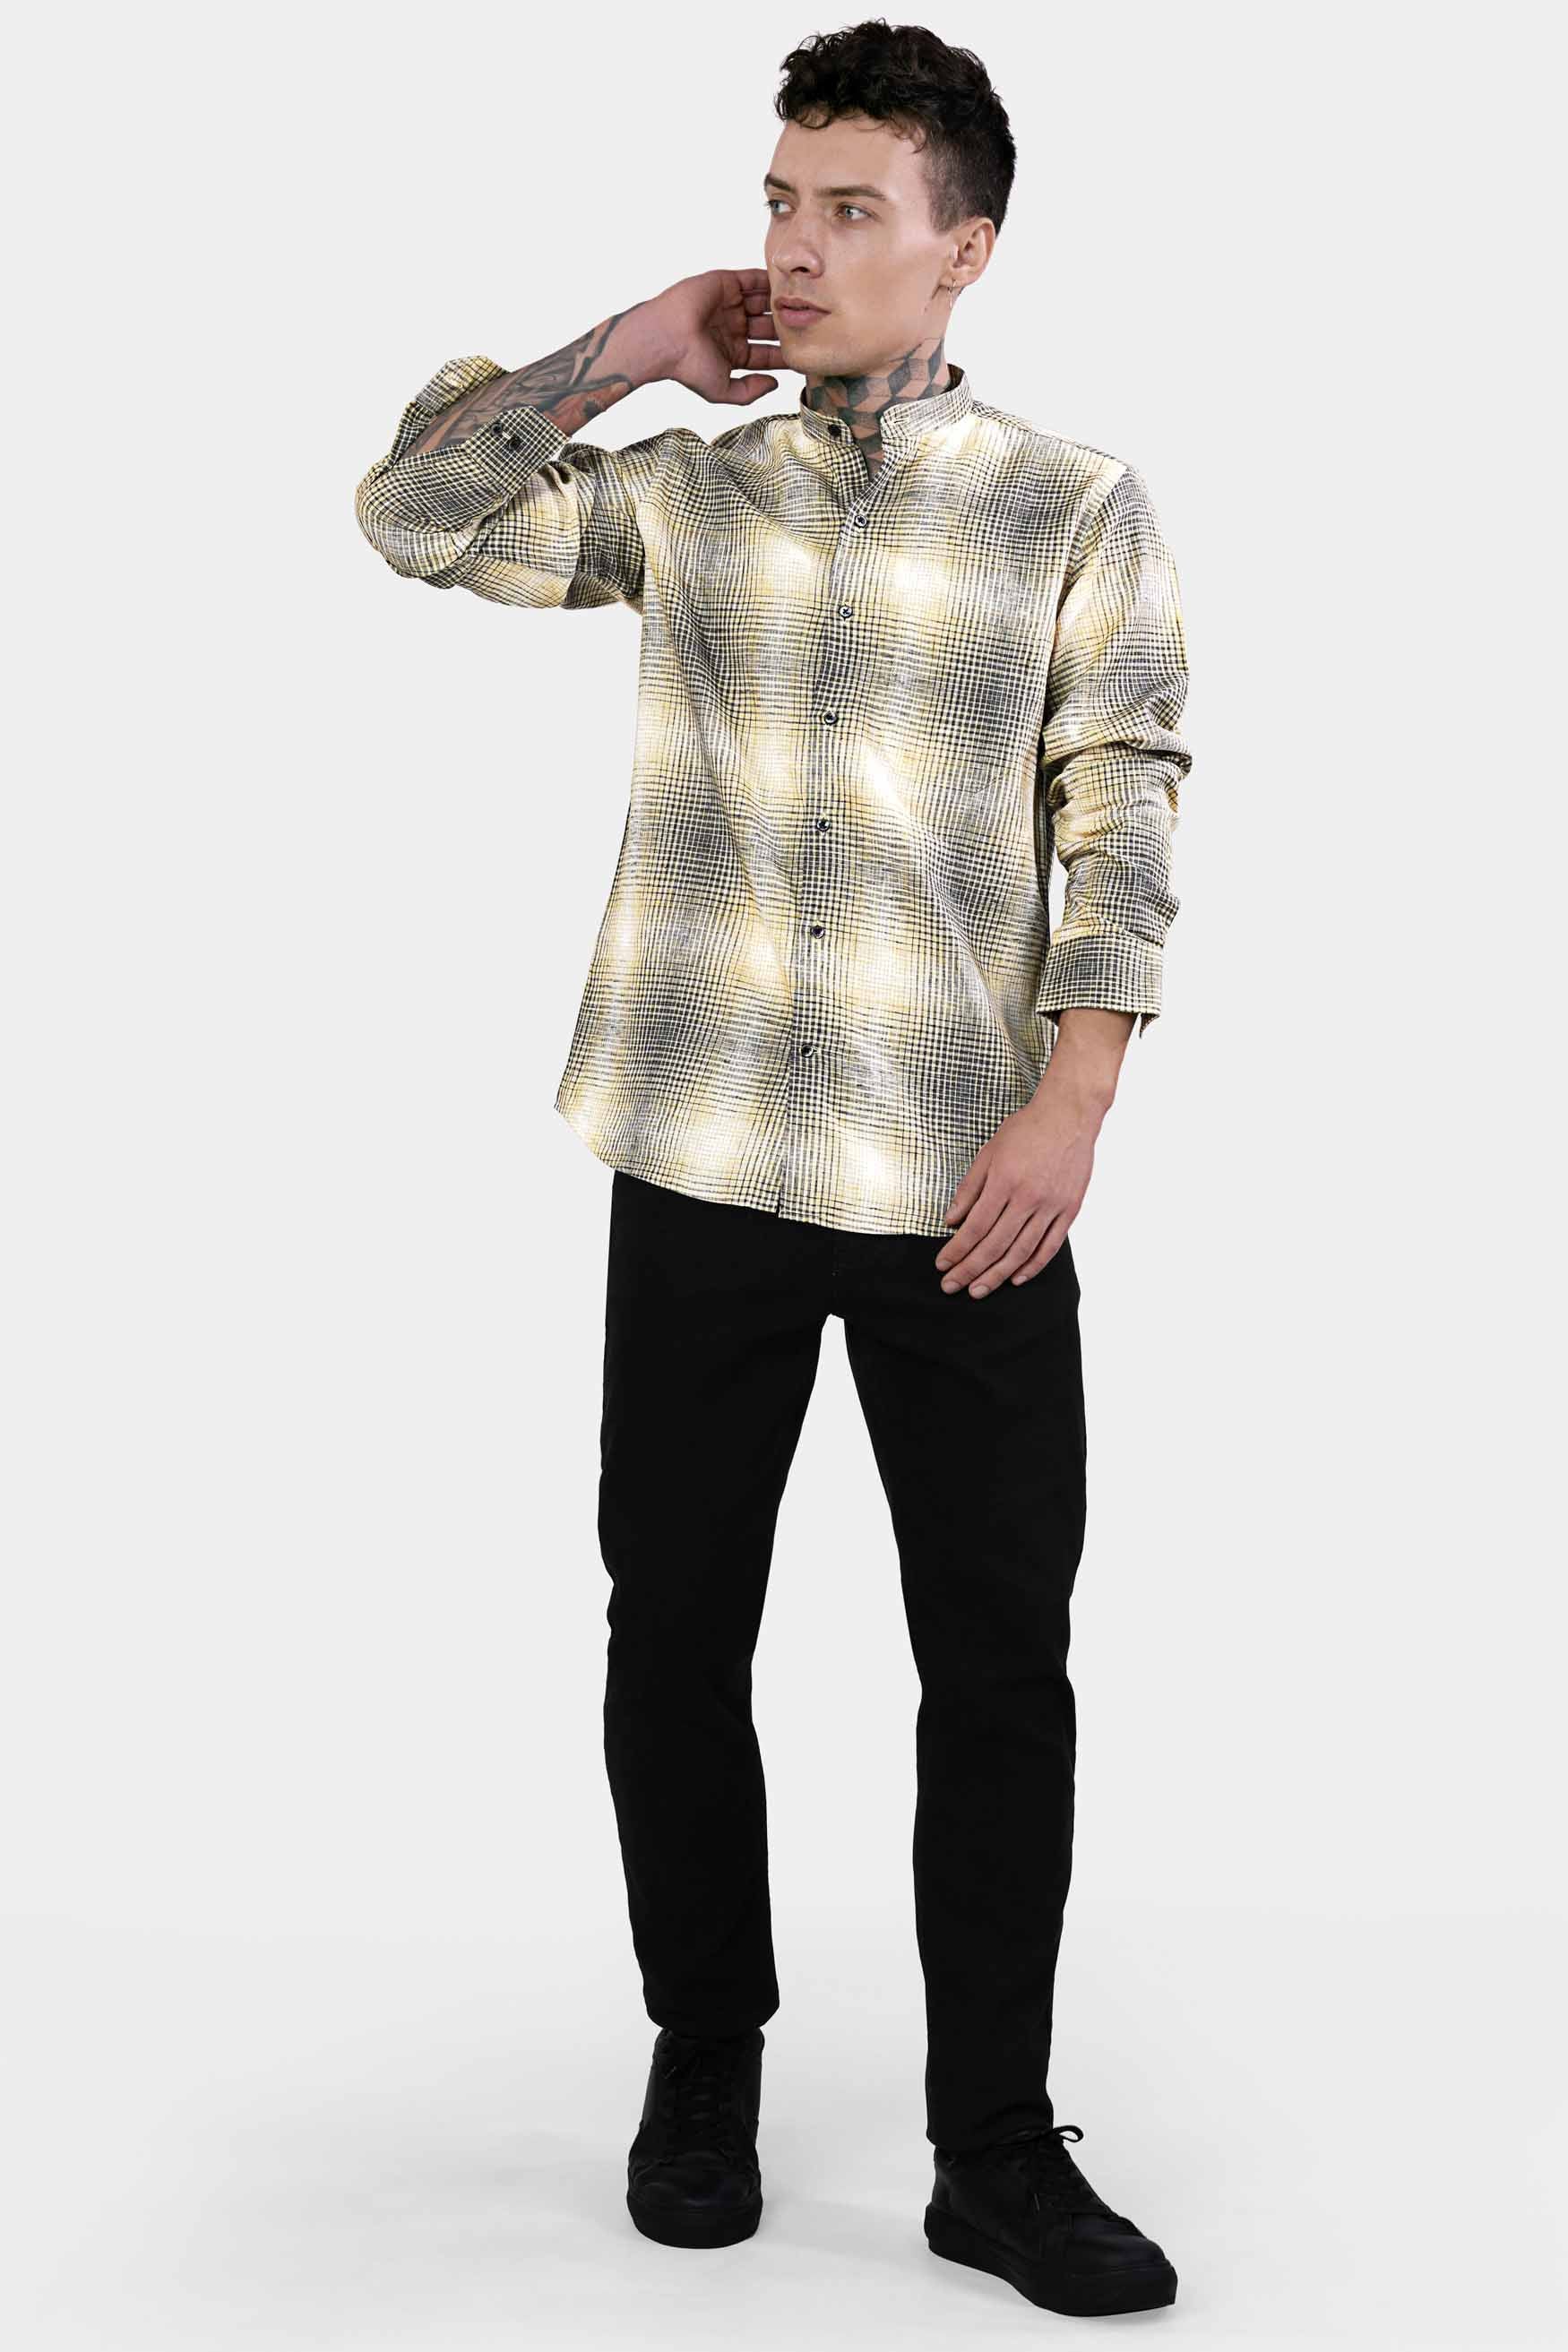 Chalky Brown and White Checkered Luxurious Linen Shirt 11411-M-BLK-38, 11411-M-BLK-H-38, 11411-M-BLK-39, 11411-M-BLK-H-39, 11411-M-BLK-40, 11411-M-BLK-H-40, 11411-M-BLK-42, 11411-M-BLK-H-42, 11411-M-BLK-44, 11411-M-BLK-H-44, 11411-M-BLK-46, 11411-M-BLK-H-46, 11411-M-BLK-48, 11411-M-BLK-H-48, 11411-M-BLK-50, 11411-M-BLK-H-50, 11411-M-BLK-52, 11411-M-BLK-H-52